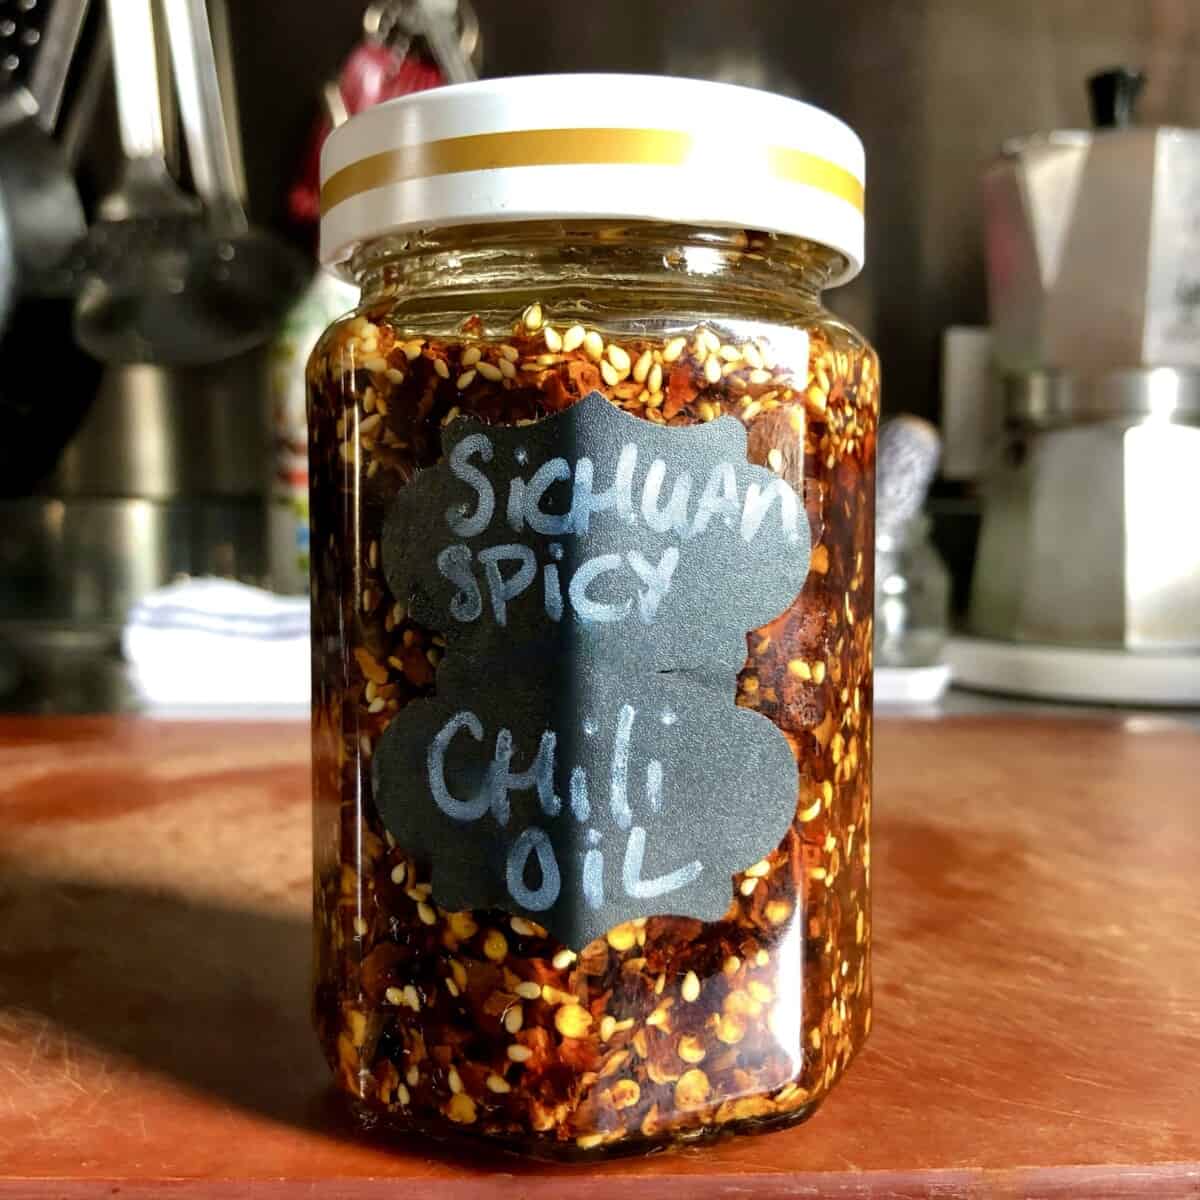 homemade Sichuan chili oil in a jar and labeled